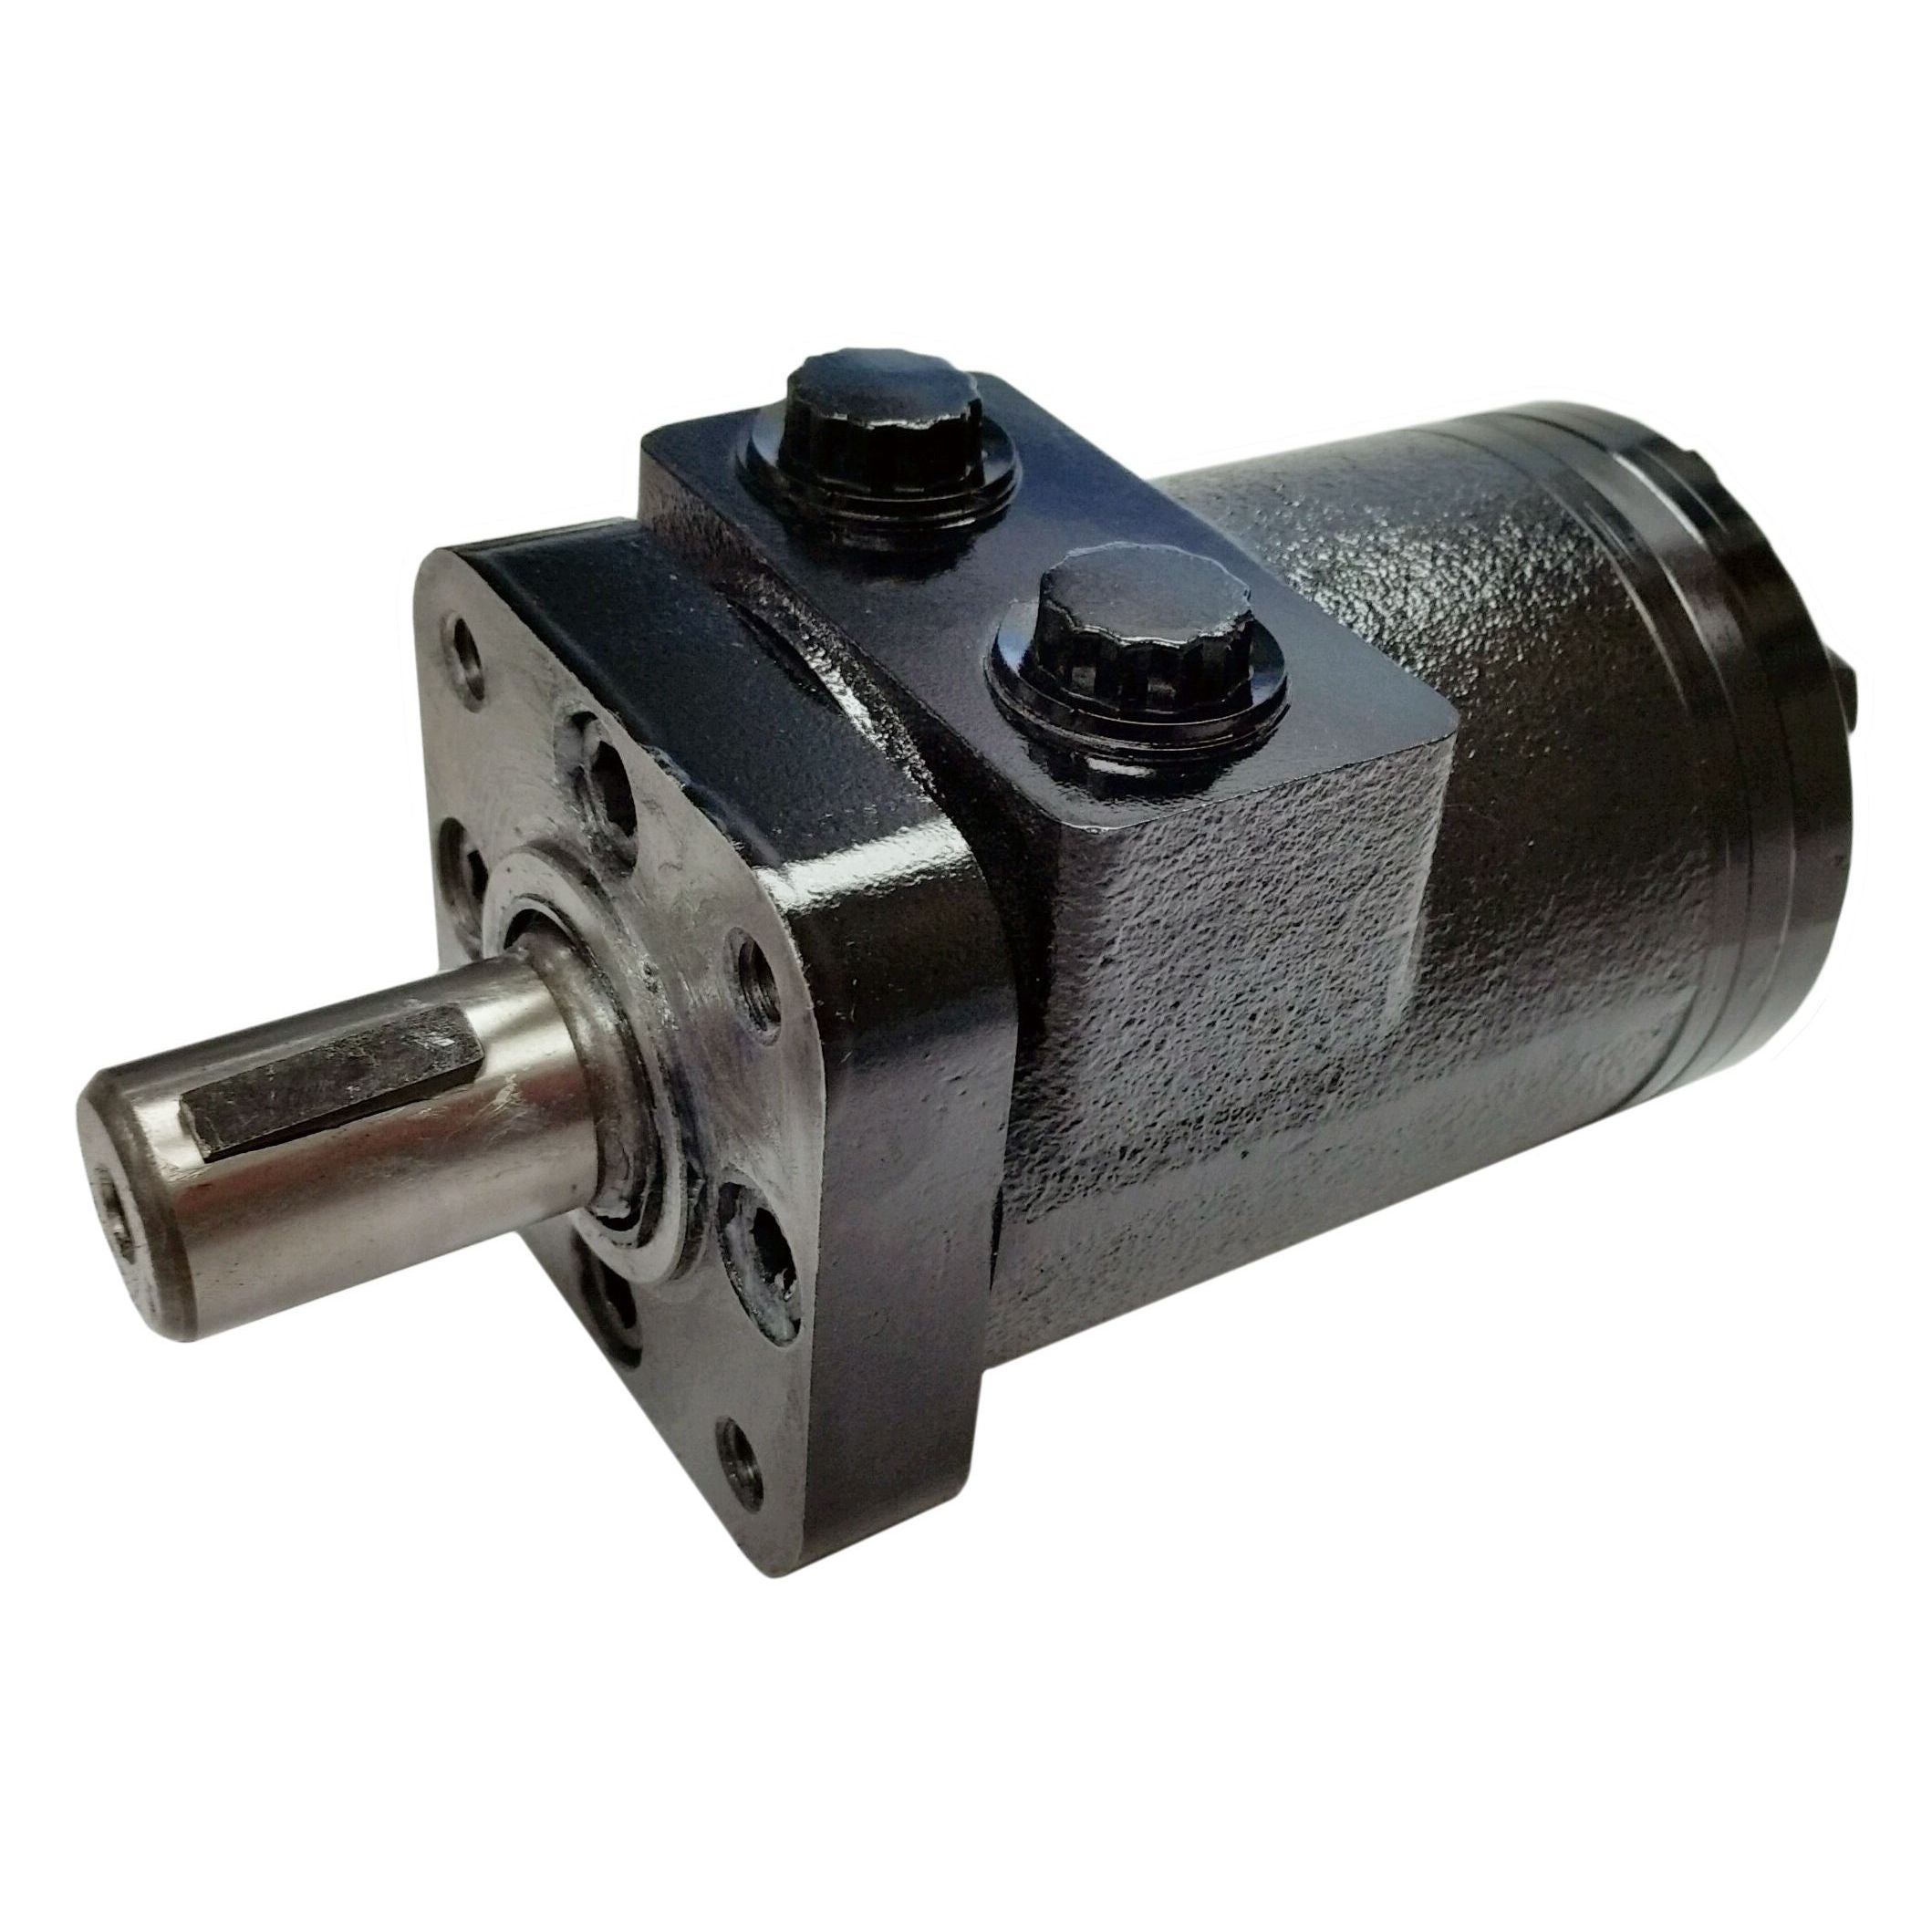 BMPH-36-H4-K-S : Dynamic LSHT Motor, 36cc, 1500RPM, 487in-lb, 1813psi Differential, 14.53GPM, SAE A 4-Bolt Mount, 1" Bore x 1/4" Key Shaft, Side Ported, #10 SAE (5/8")